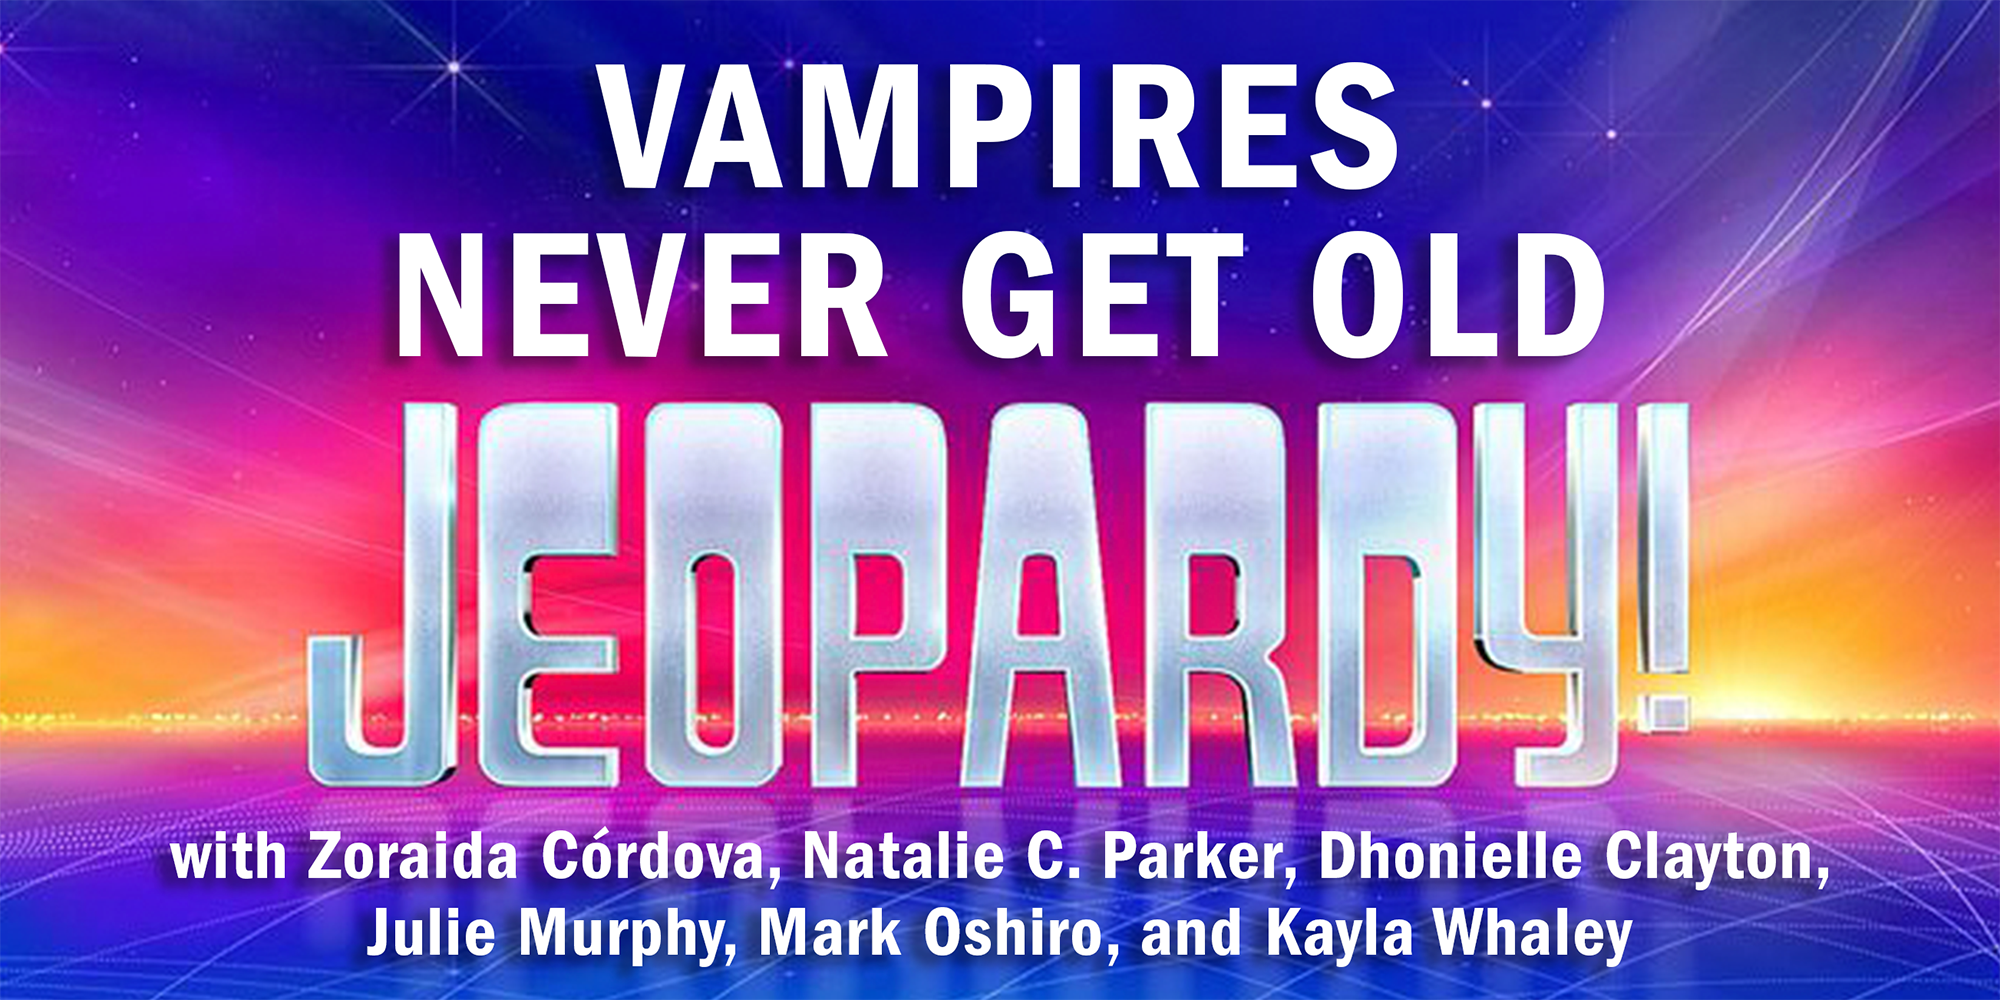 Vampires Never Get Old Jeopardy